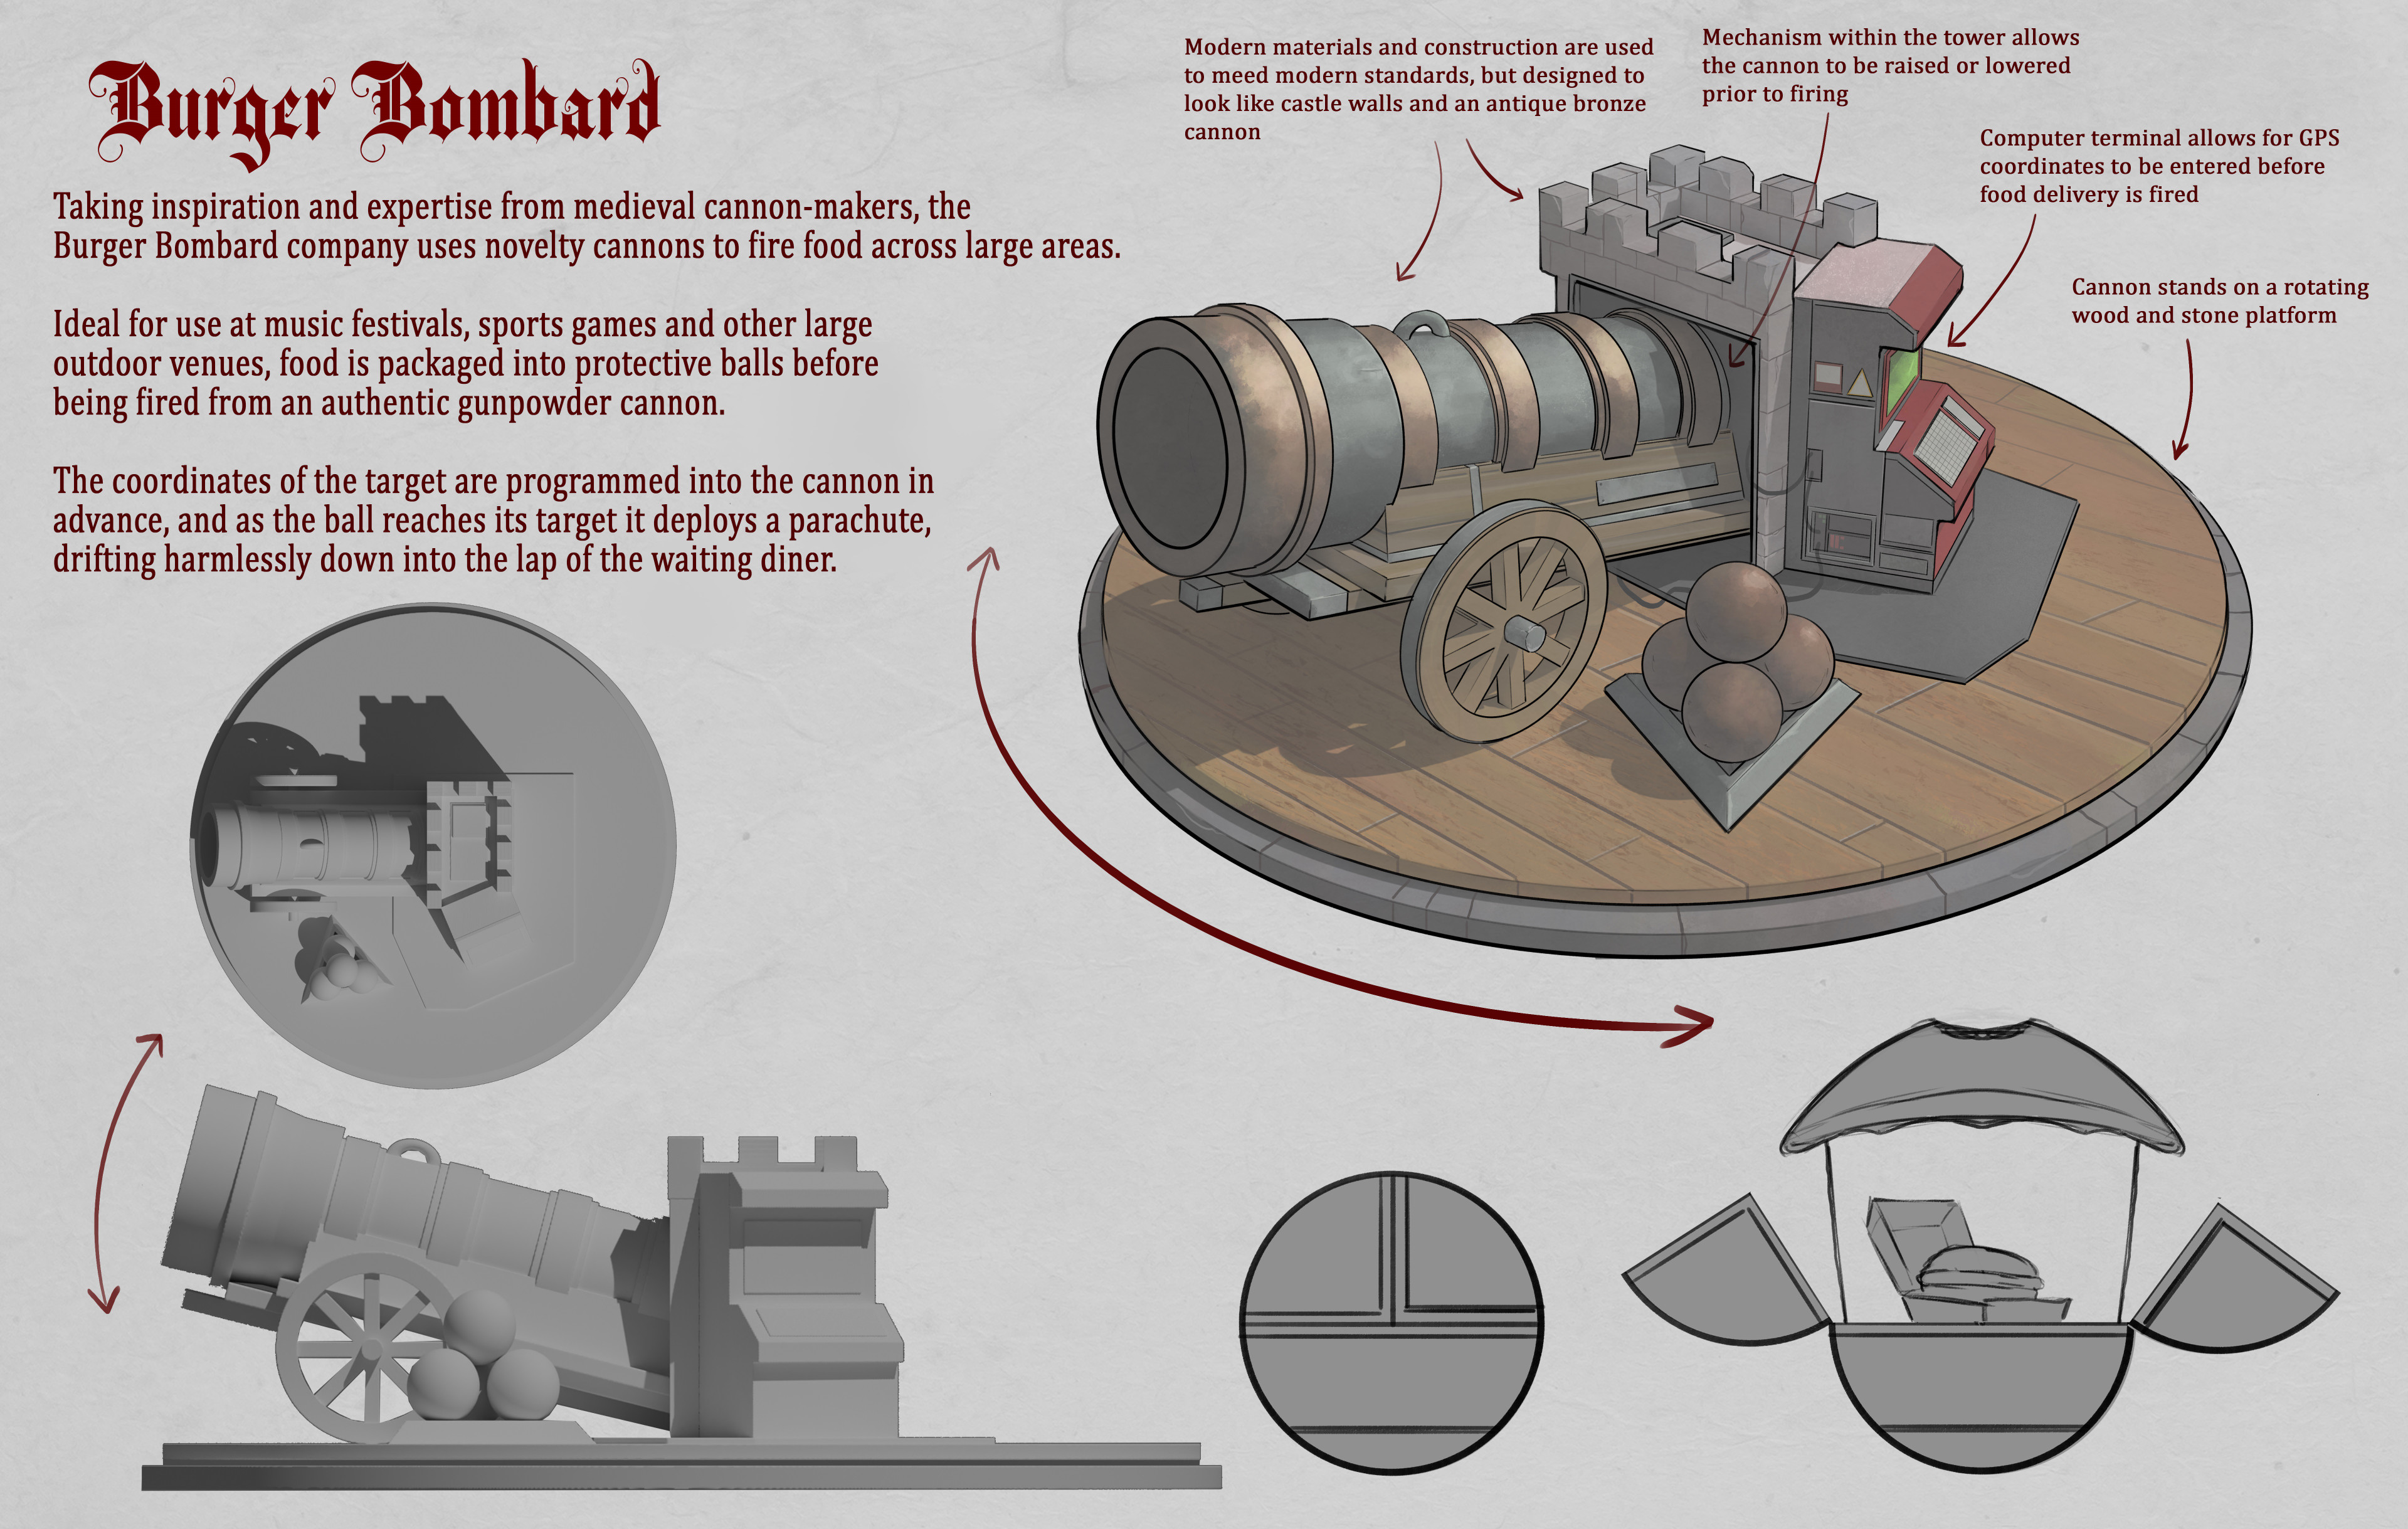 Detail sheet. After rough sketches, I made a model in 3DCoat, then drew and painted over that.